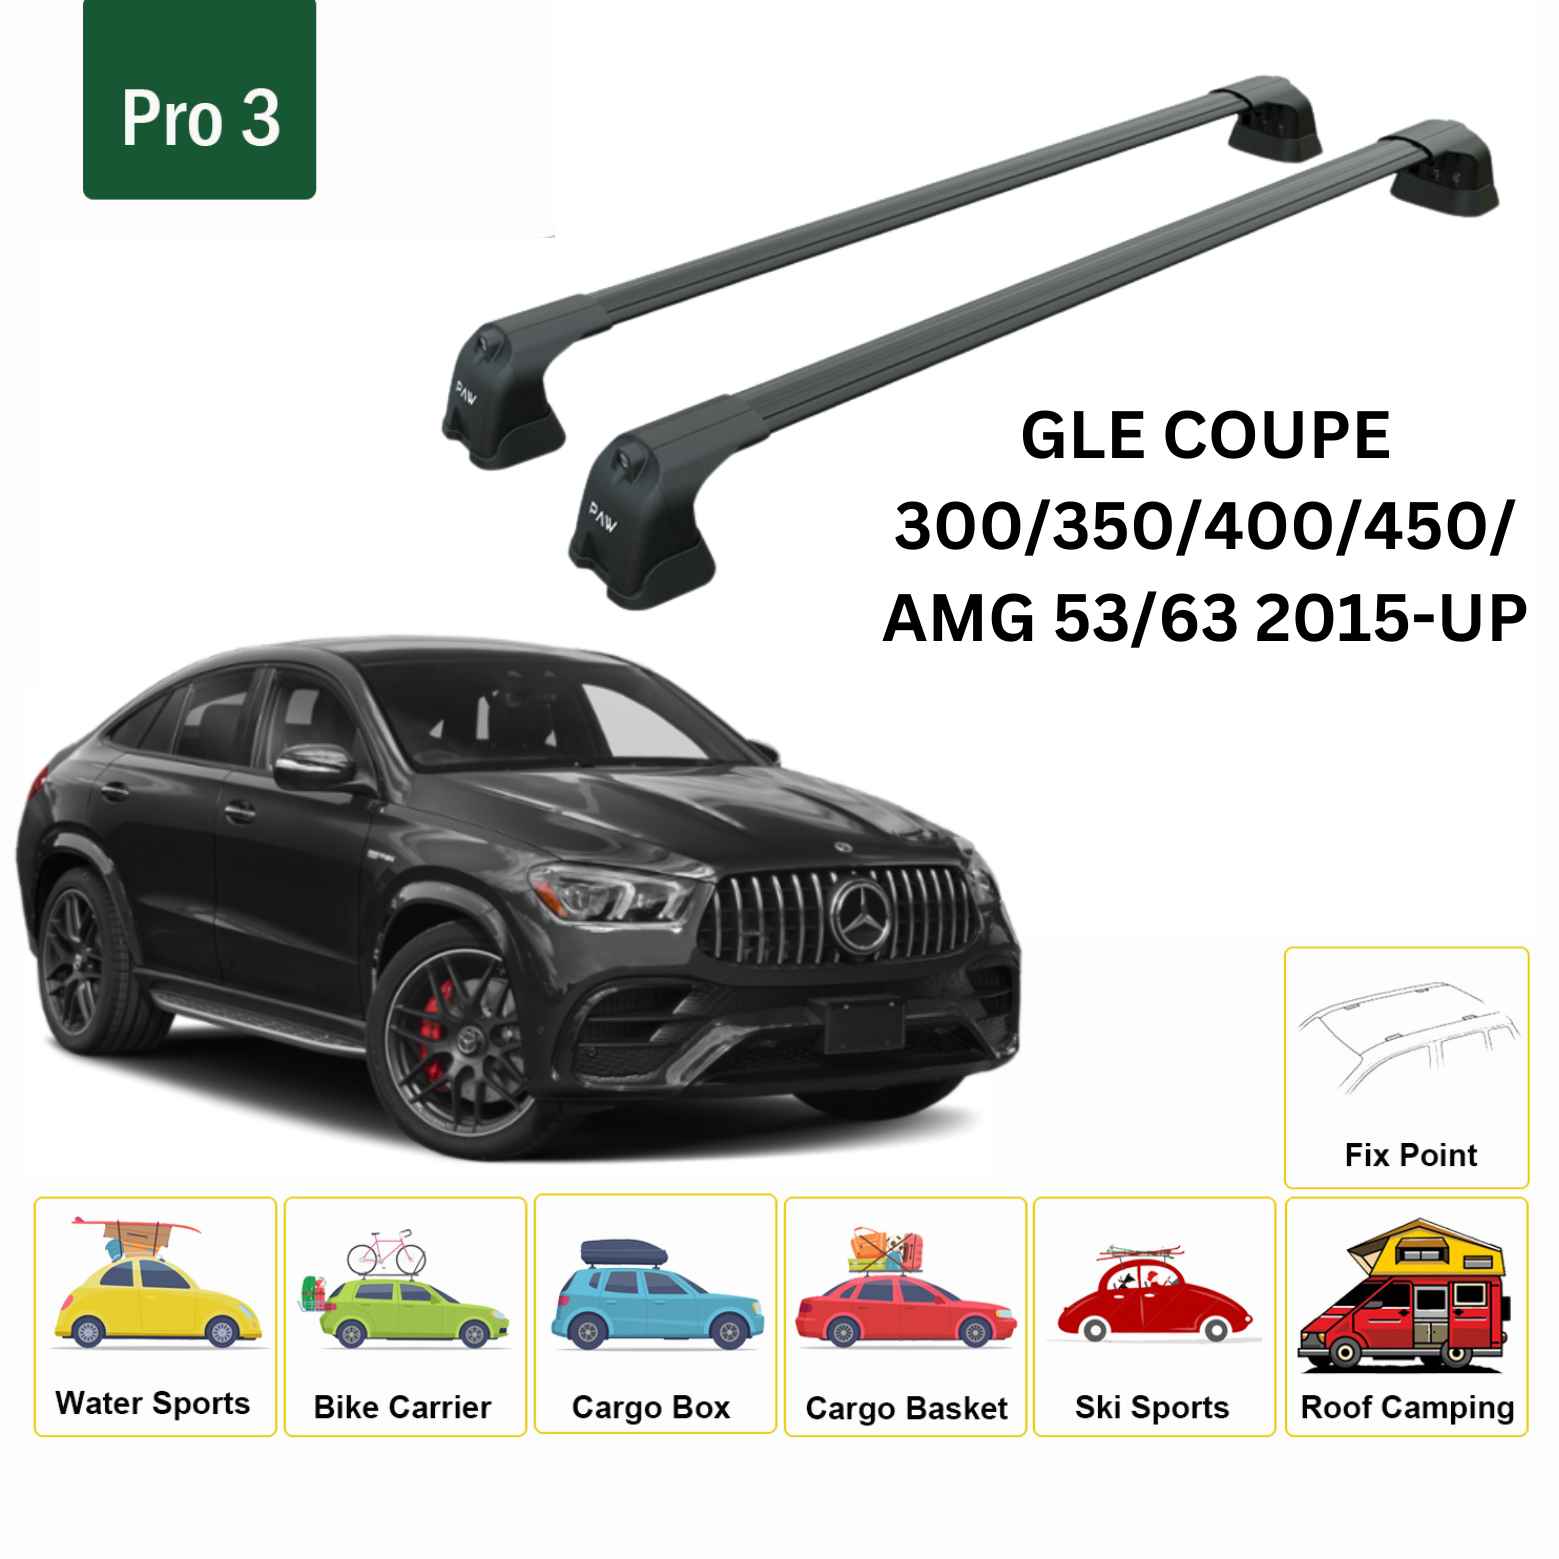 For Mercedes Benz GLE Coupe 2015-Up Roof Rack Cross Bars Fix Point Alu Black - 0